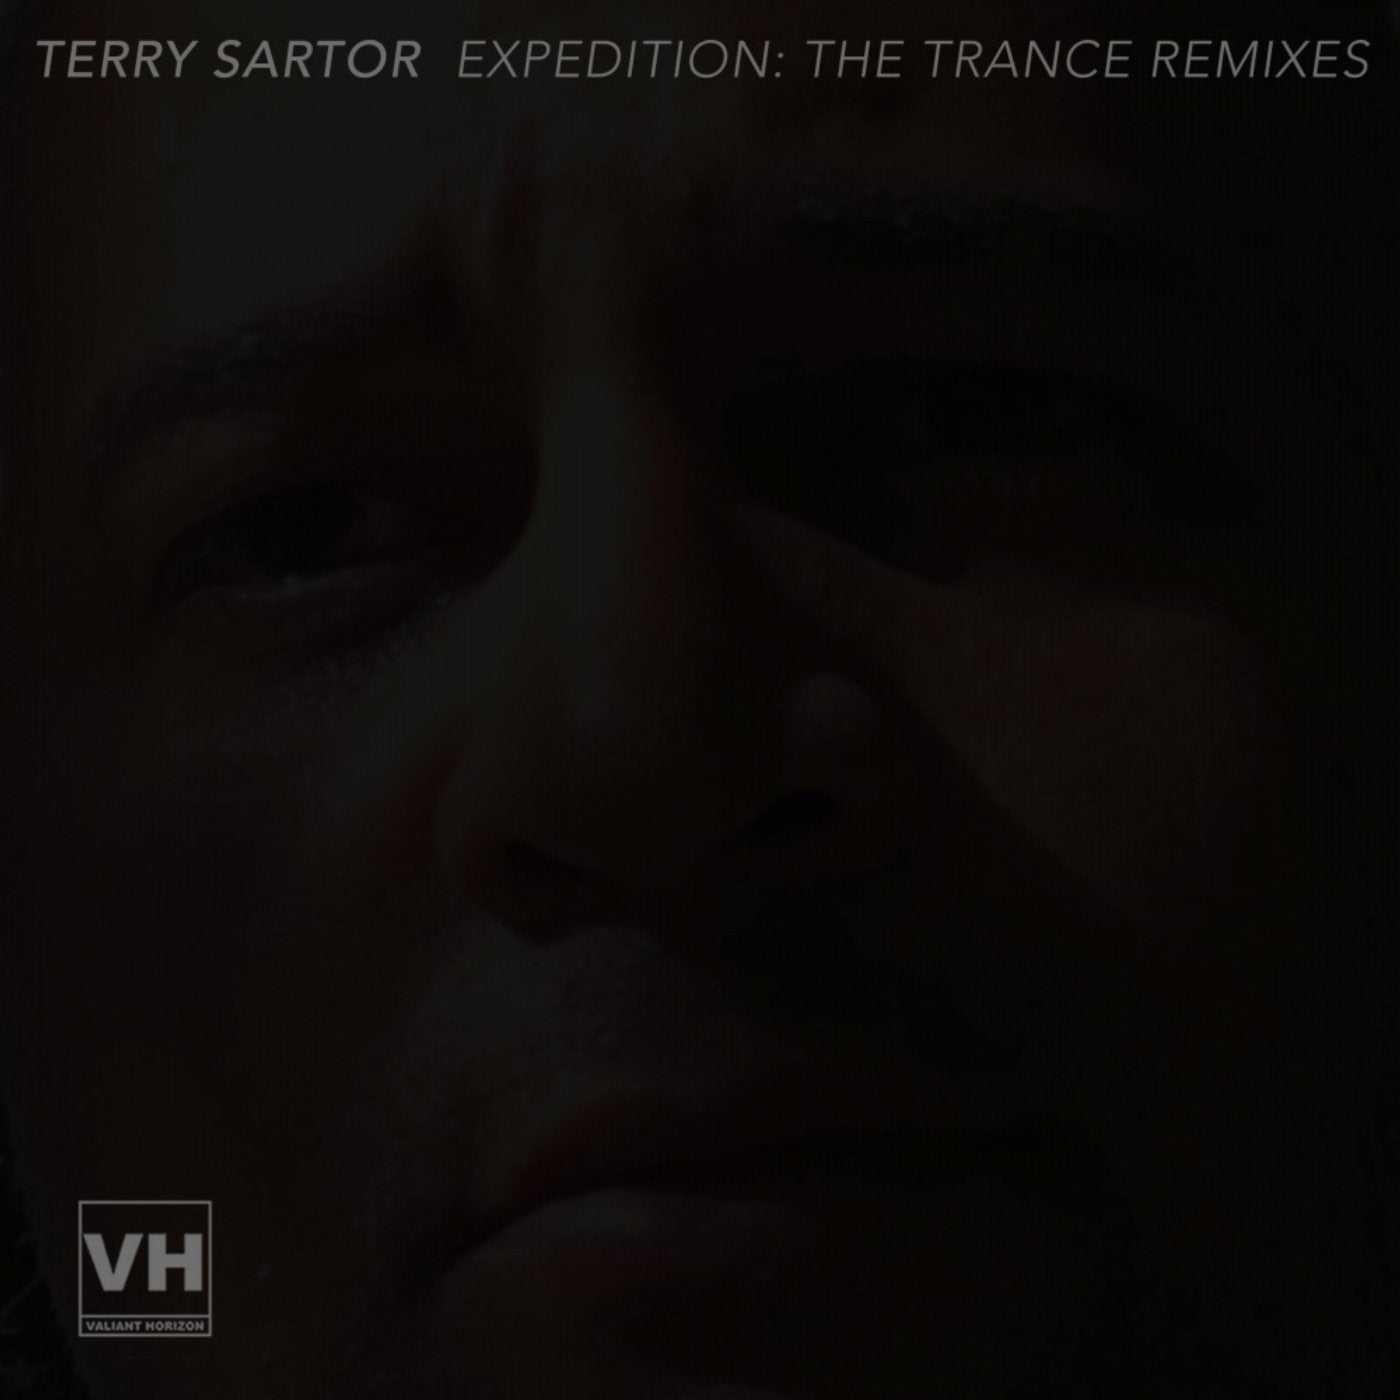 EXPEDITION: The Trance Remixes